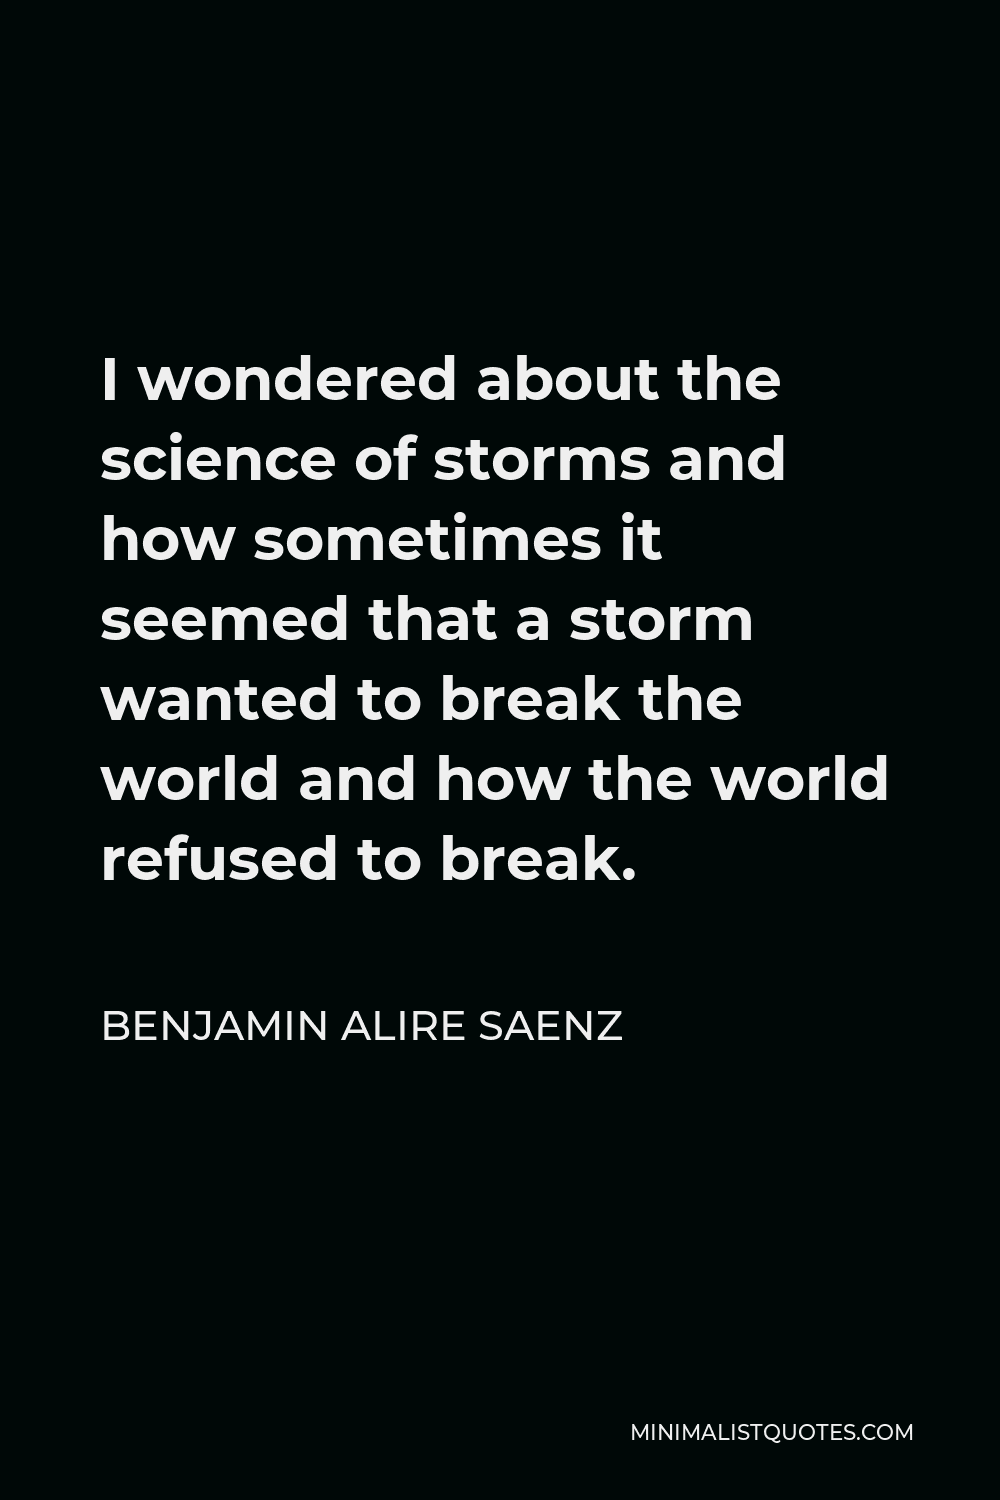 Benjamin Alire Saenz Quote - I wondered about the science of storms and how sometimes it seemed that a storm wanted to break the world and how the world refused to break.